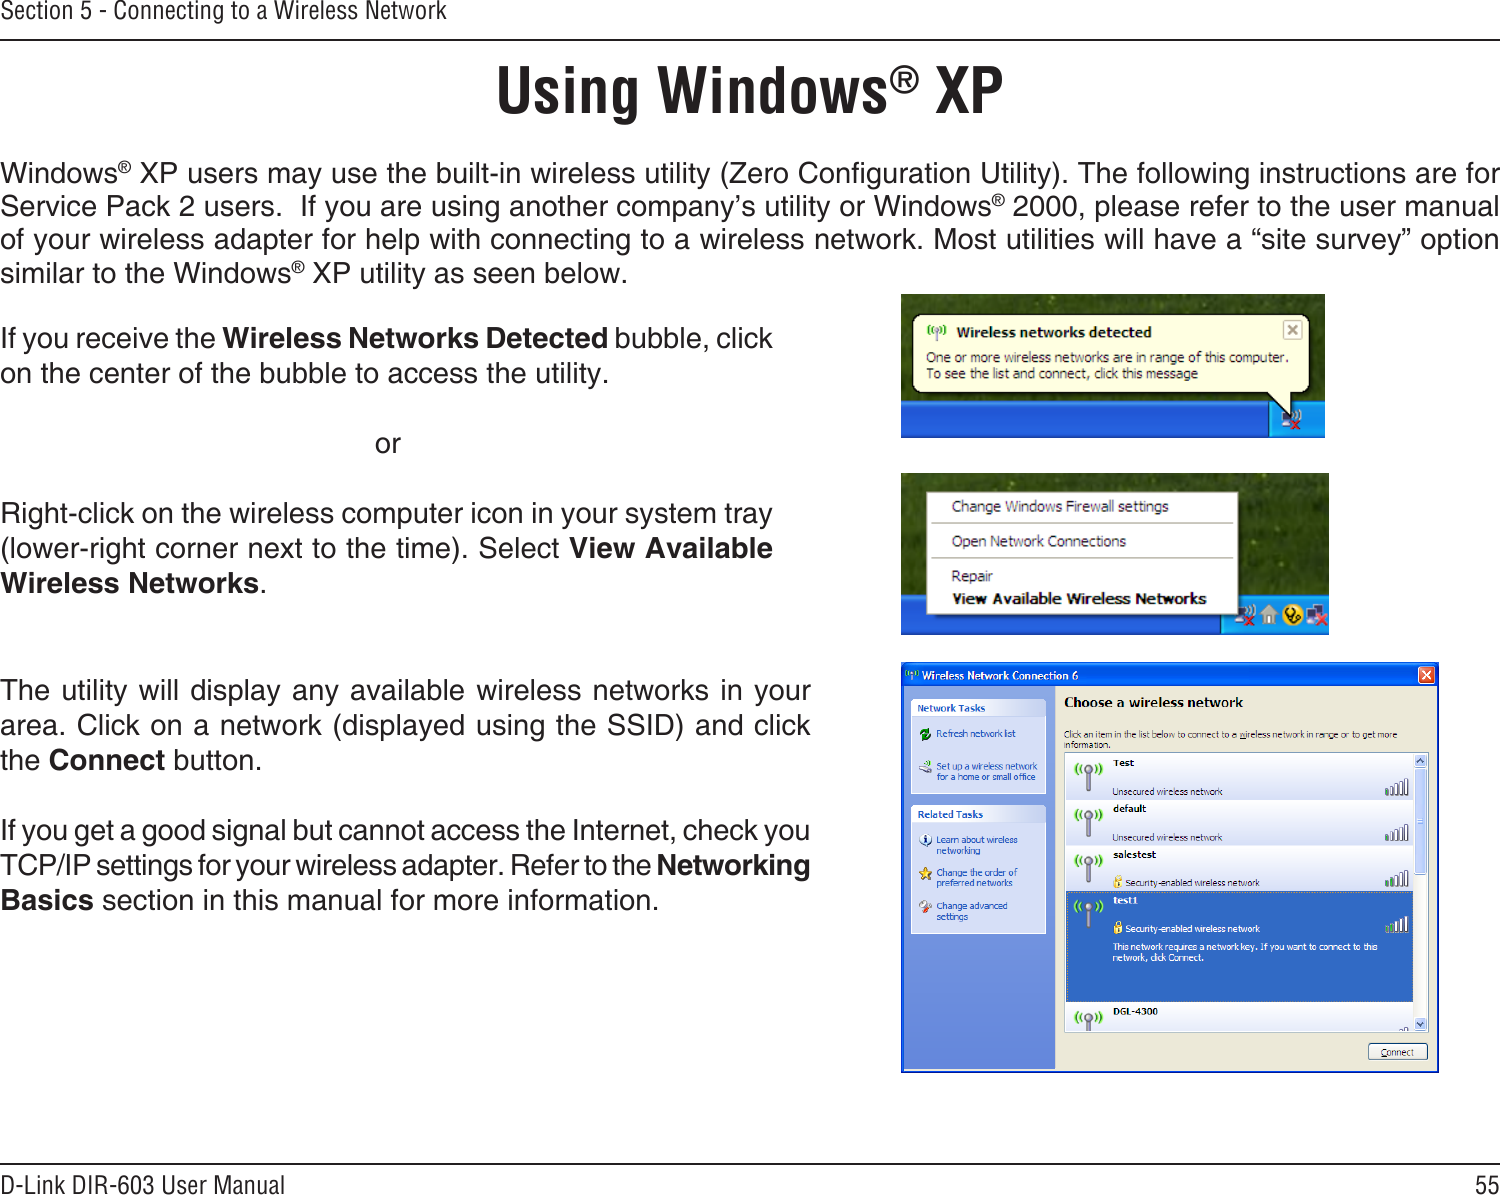 55D-Link DIR-603 User ManualSection 5 - Connecting to a Wireless NetworkUsing Windows® XPWindows® XP users may use the built-in wireless utility (Zero Conguration Utility). The following instructions are for Service Pack 2 users.  If you are using another company’s utility or Windows® 2000, please refer to the user manual of your wireless adapter for help with connecting to a wireless network. Most utilities will have a “site survey” option similar to the Windows® XP utility as seen below.If you receive the Wireless Networks Detected bubble, click on the center of the bubble to access the utility.     orRight-click on the wireless computer icon in your system tray (lower-right corner next to the time). Select View Available Wireless Networks.The utility will display any available wireless networks in your area. Click on a network (displayed using the SSID) and click the Connect button.If you get a good signal but cannot access the Internet, check you TCP/IP settings for your wireless adapter. Refer to the Networking Basics section in this manual for more information.